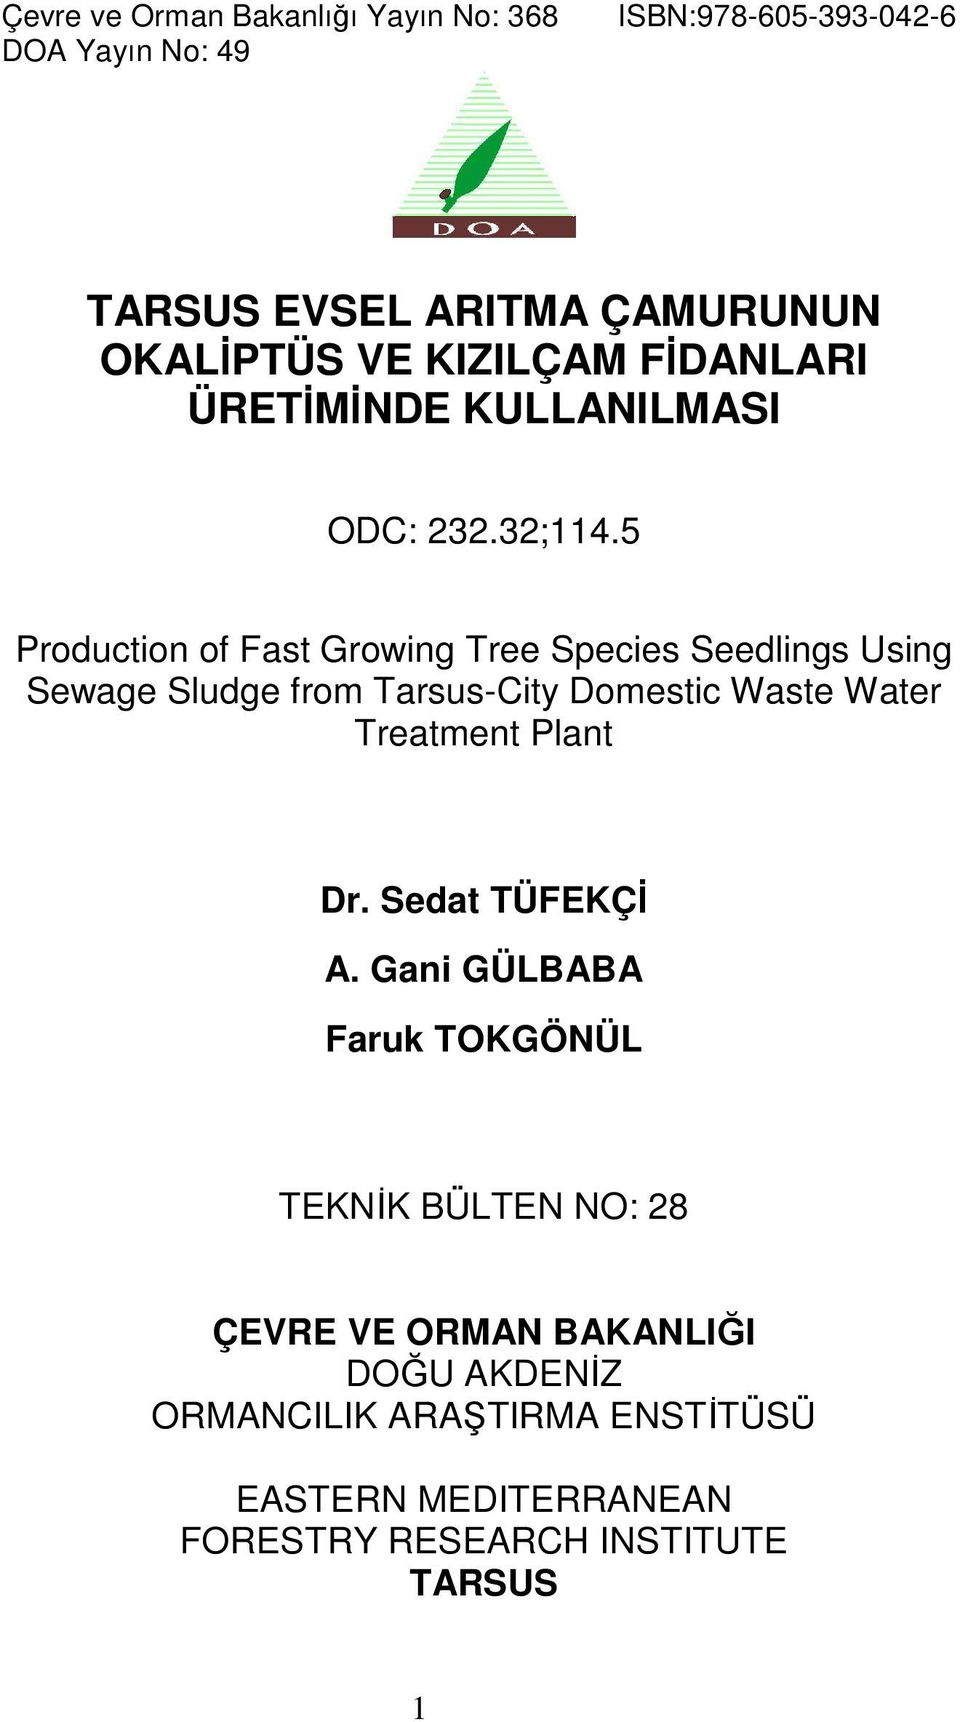 5 Production of Fast Growing Tree Species Seedlings Using Sewage Sludge from Tarsus-City Domestic Waste Water Treatment Plant